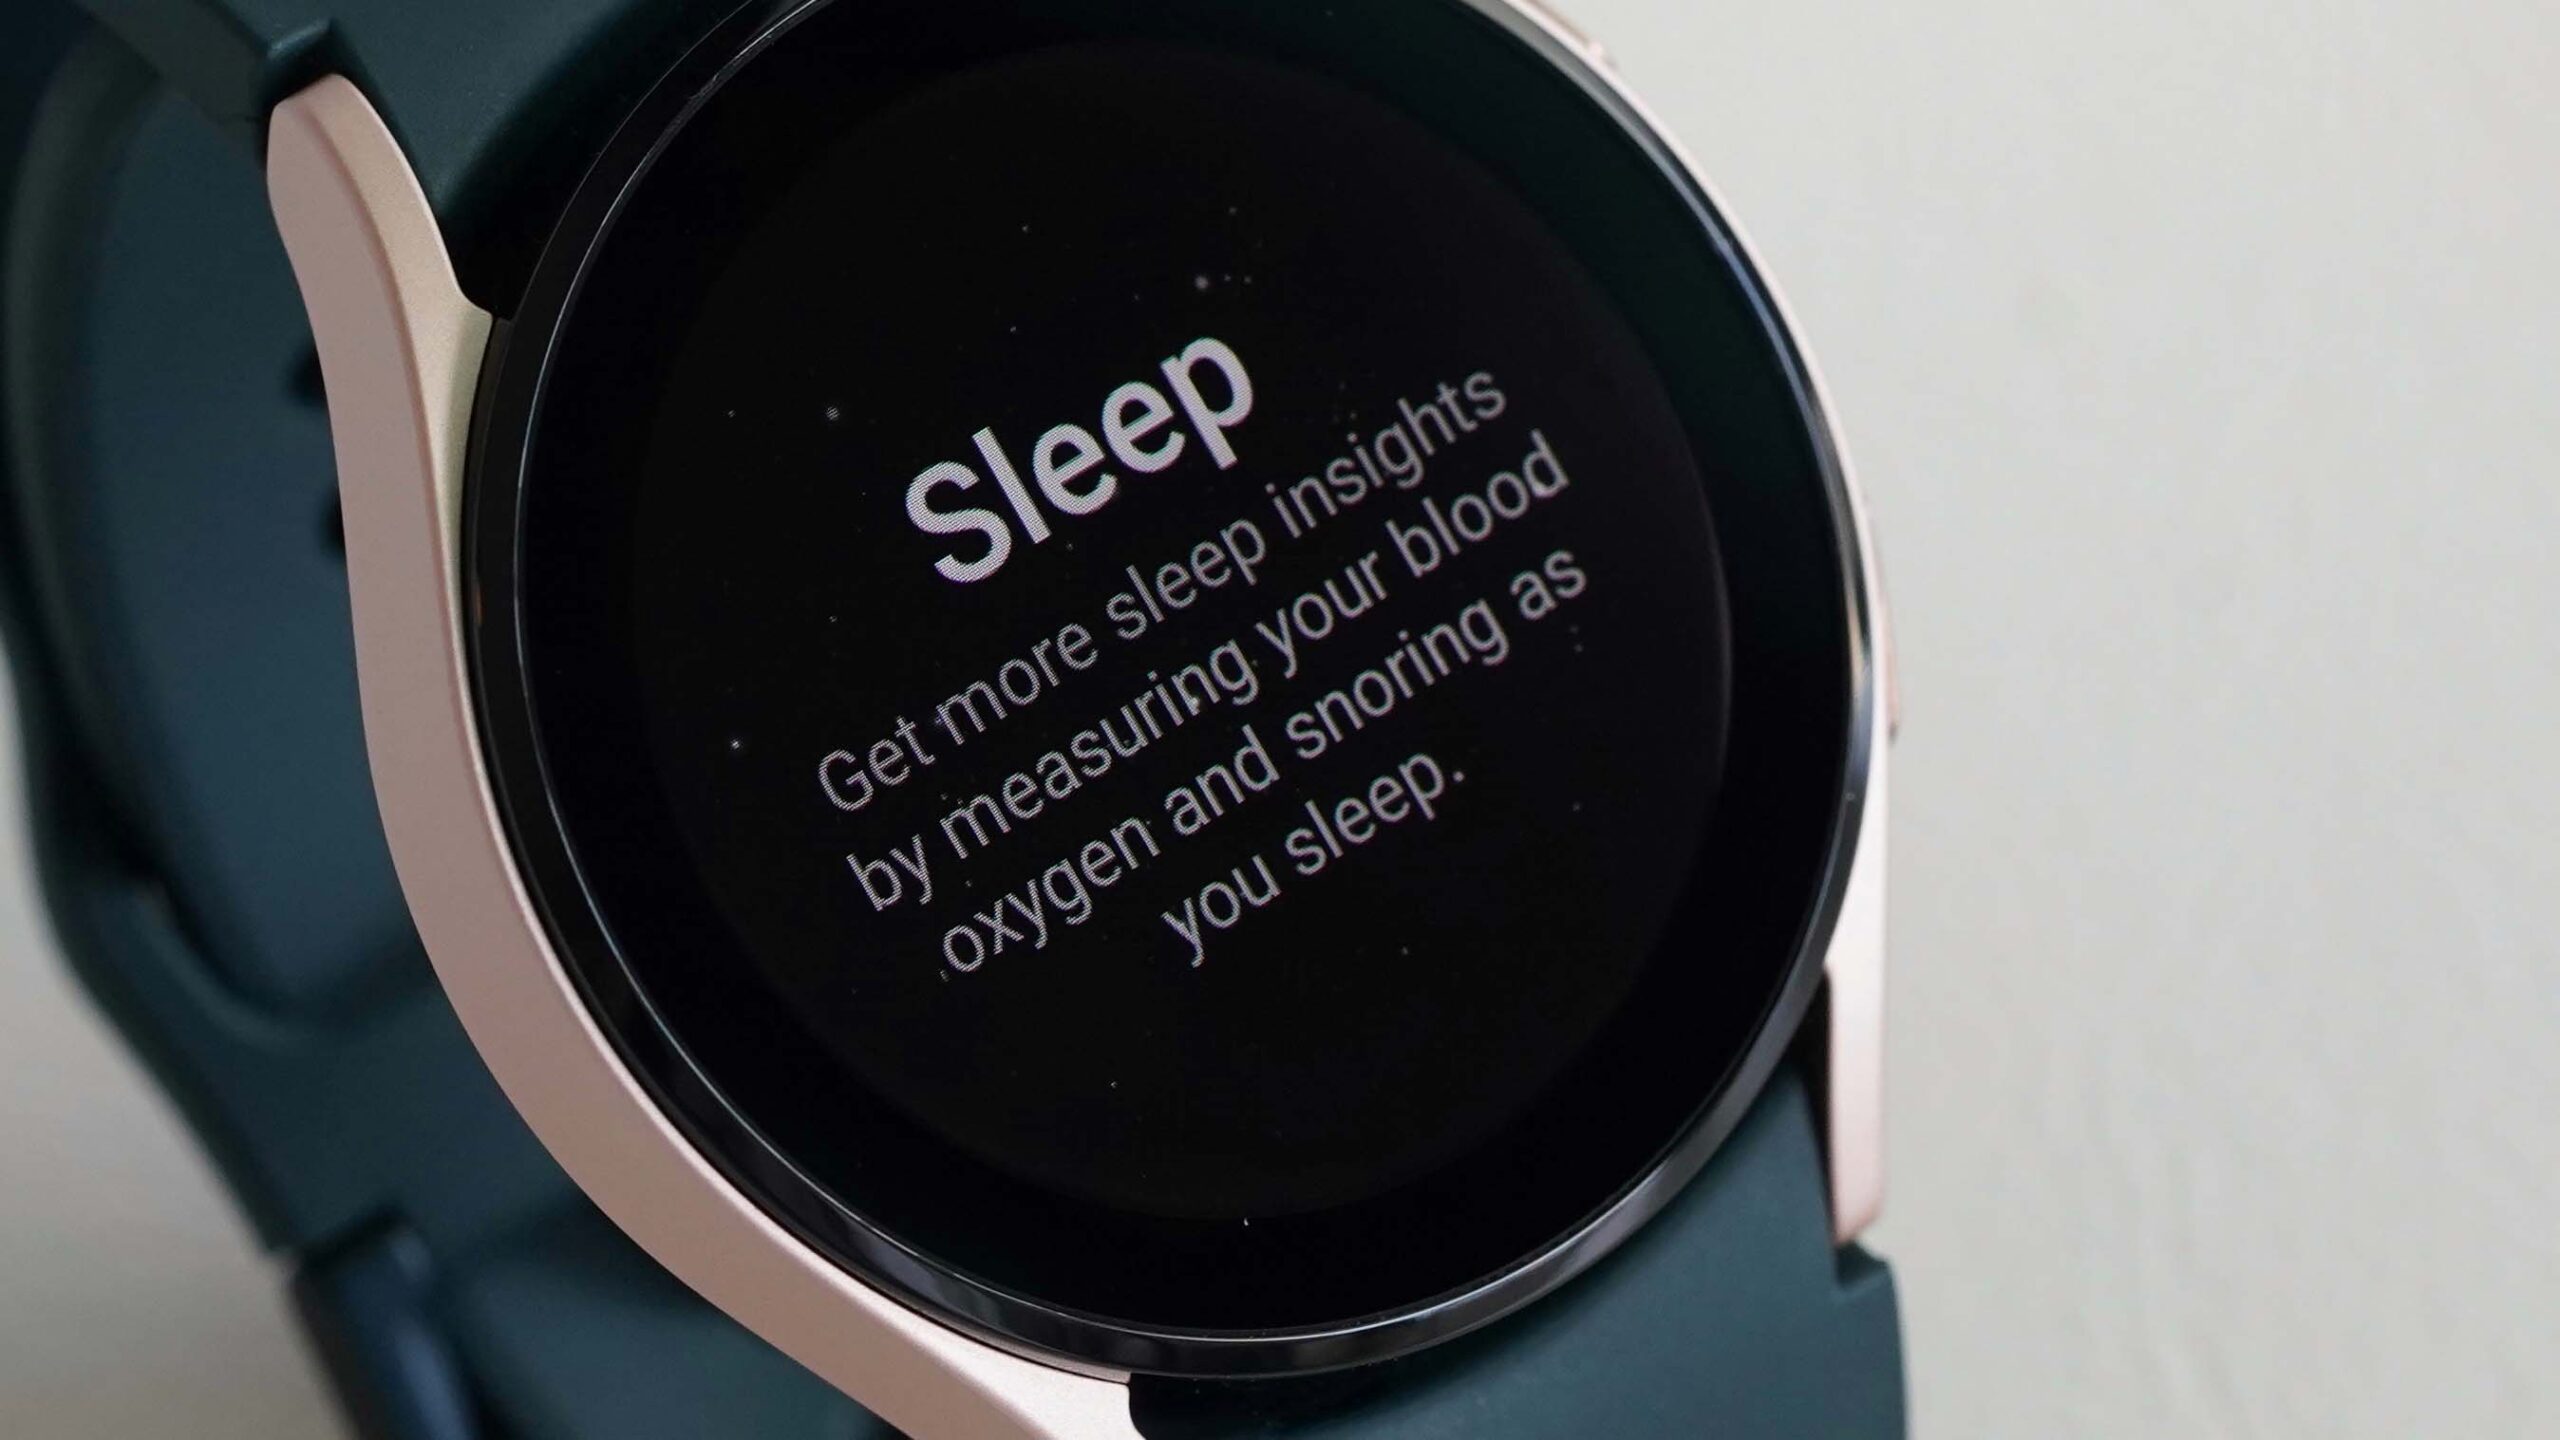 A Samsung Galaxy Watch displays information about the platform's sleep tracking.